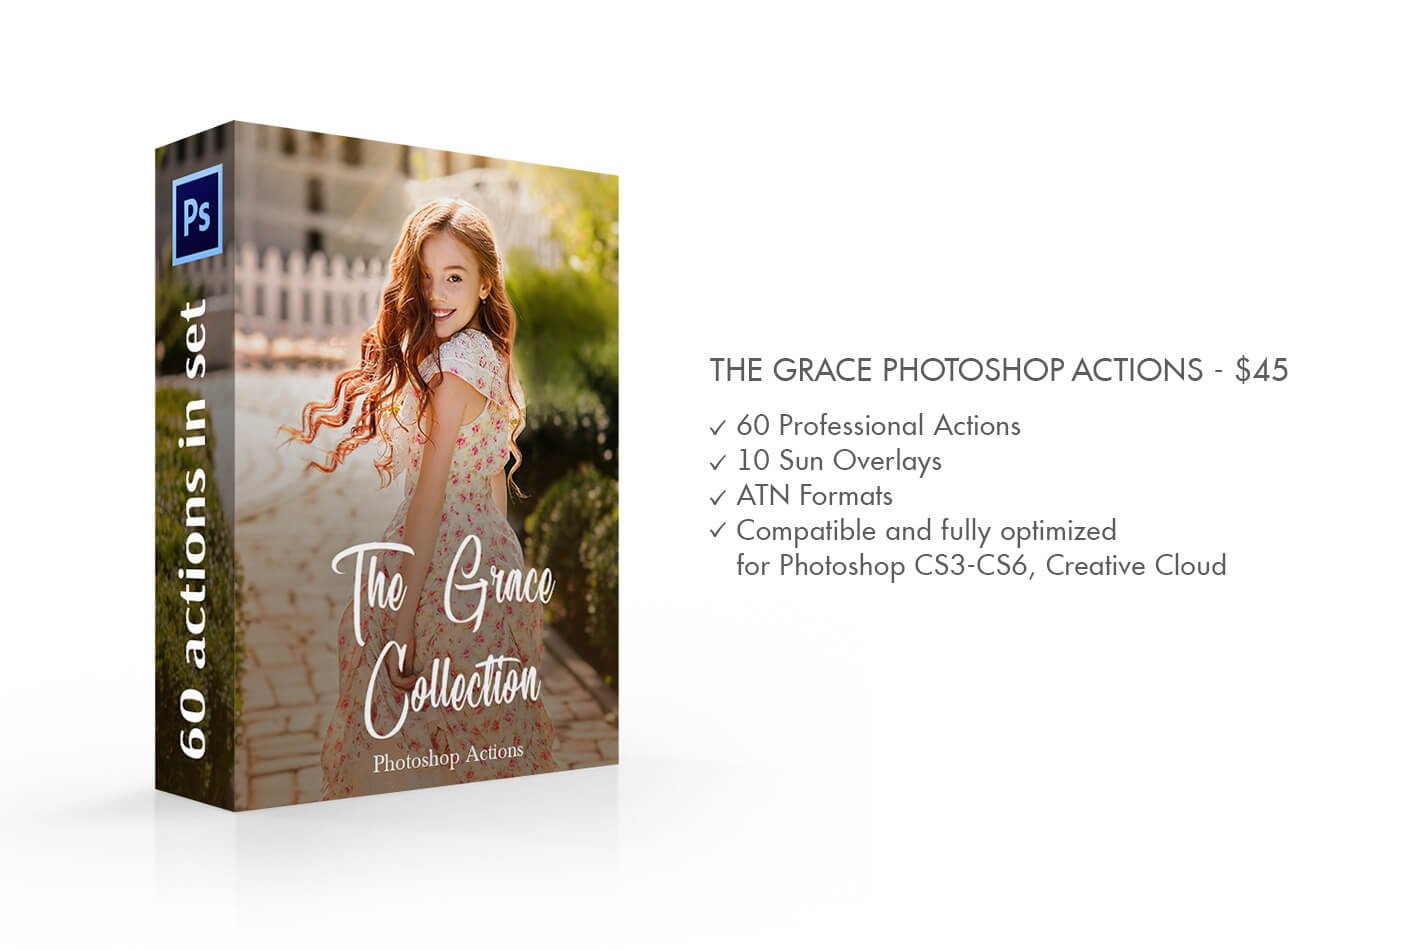 The Grace Photoshop Actionspreview image.